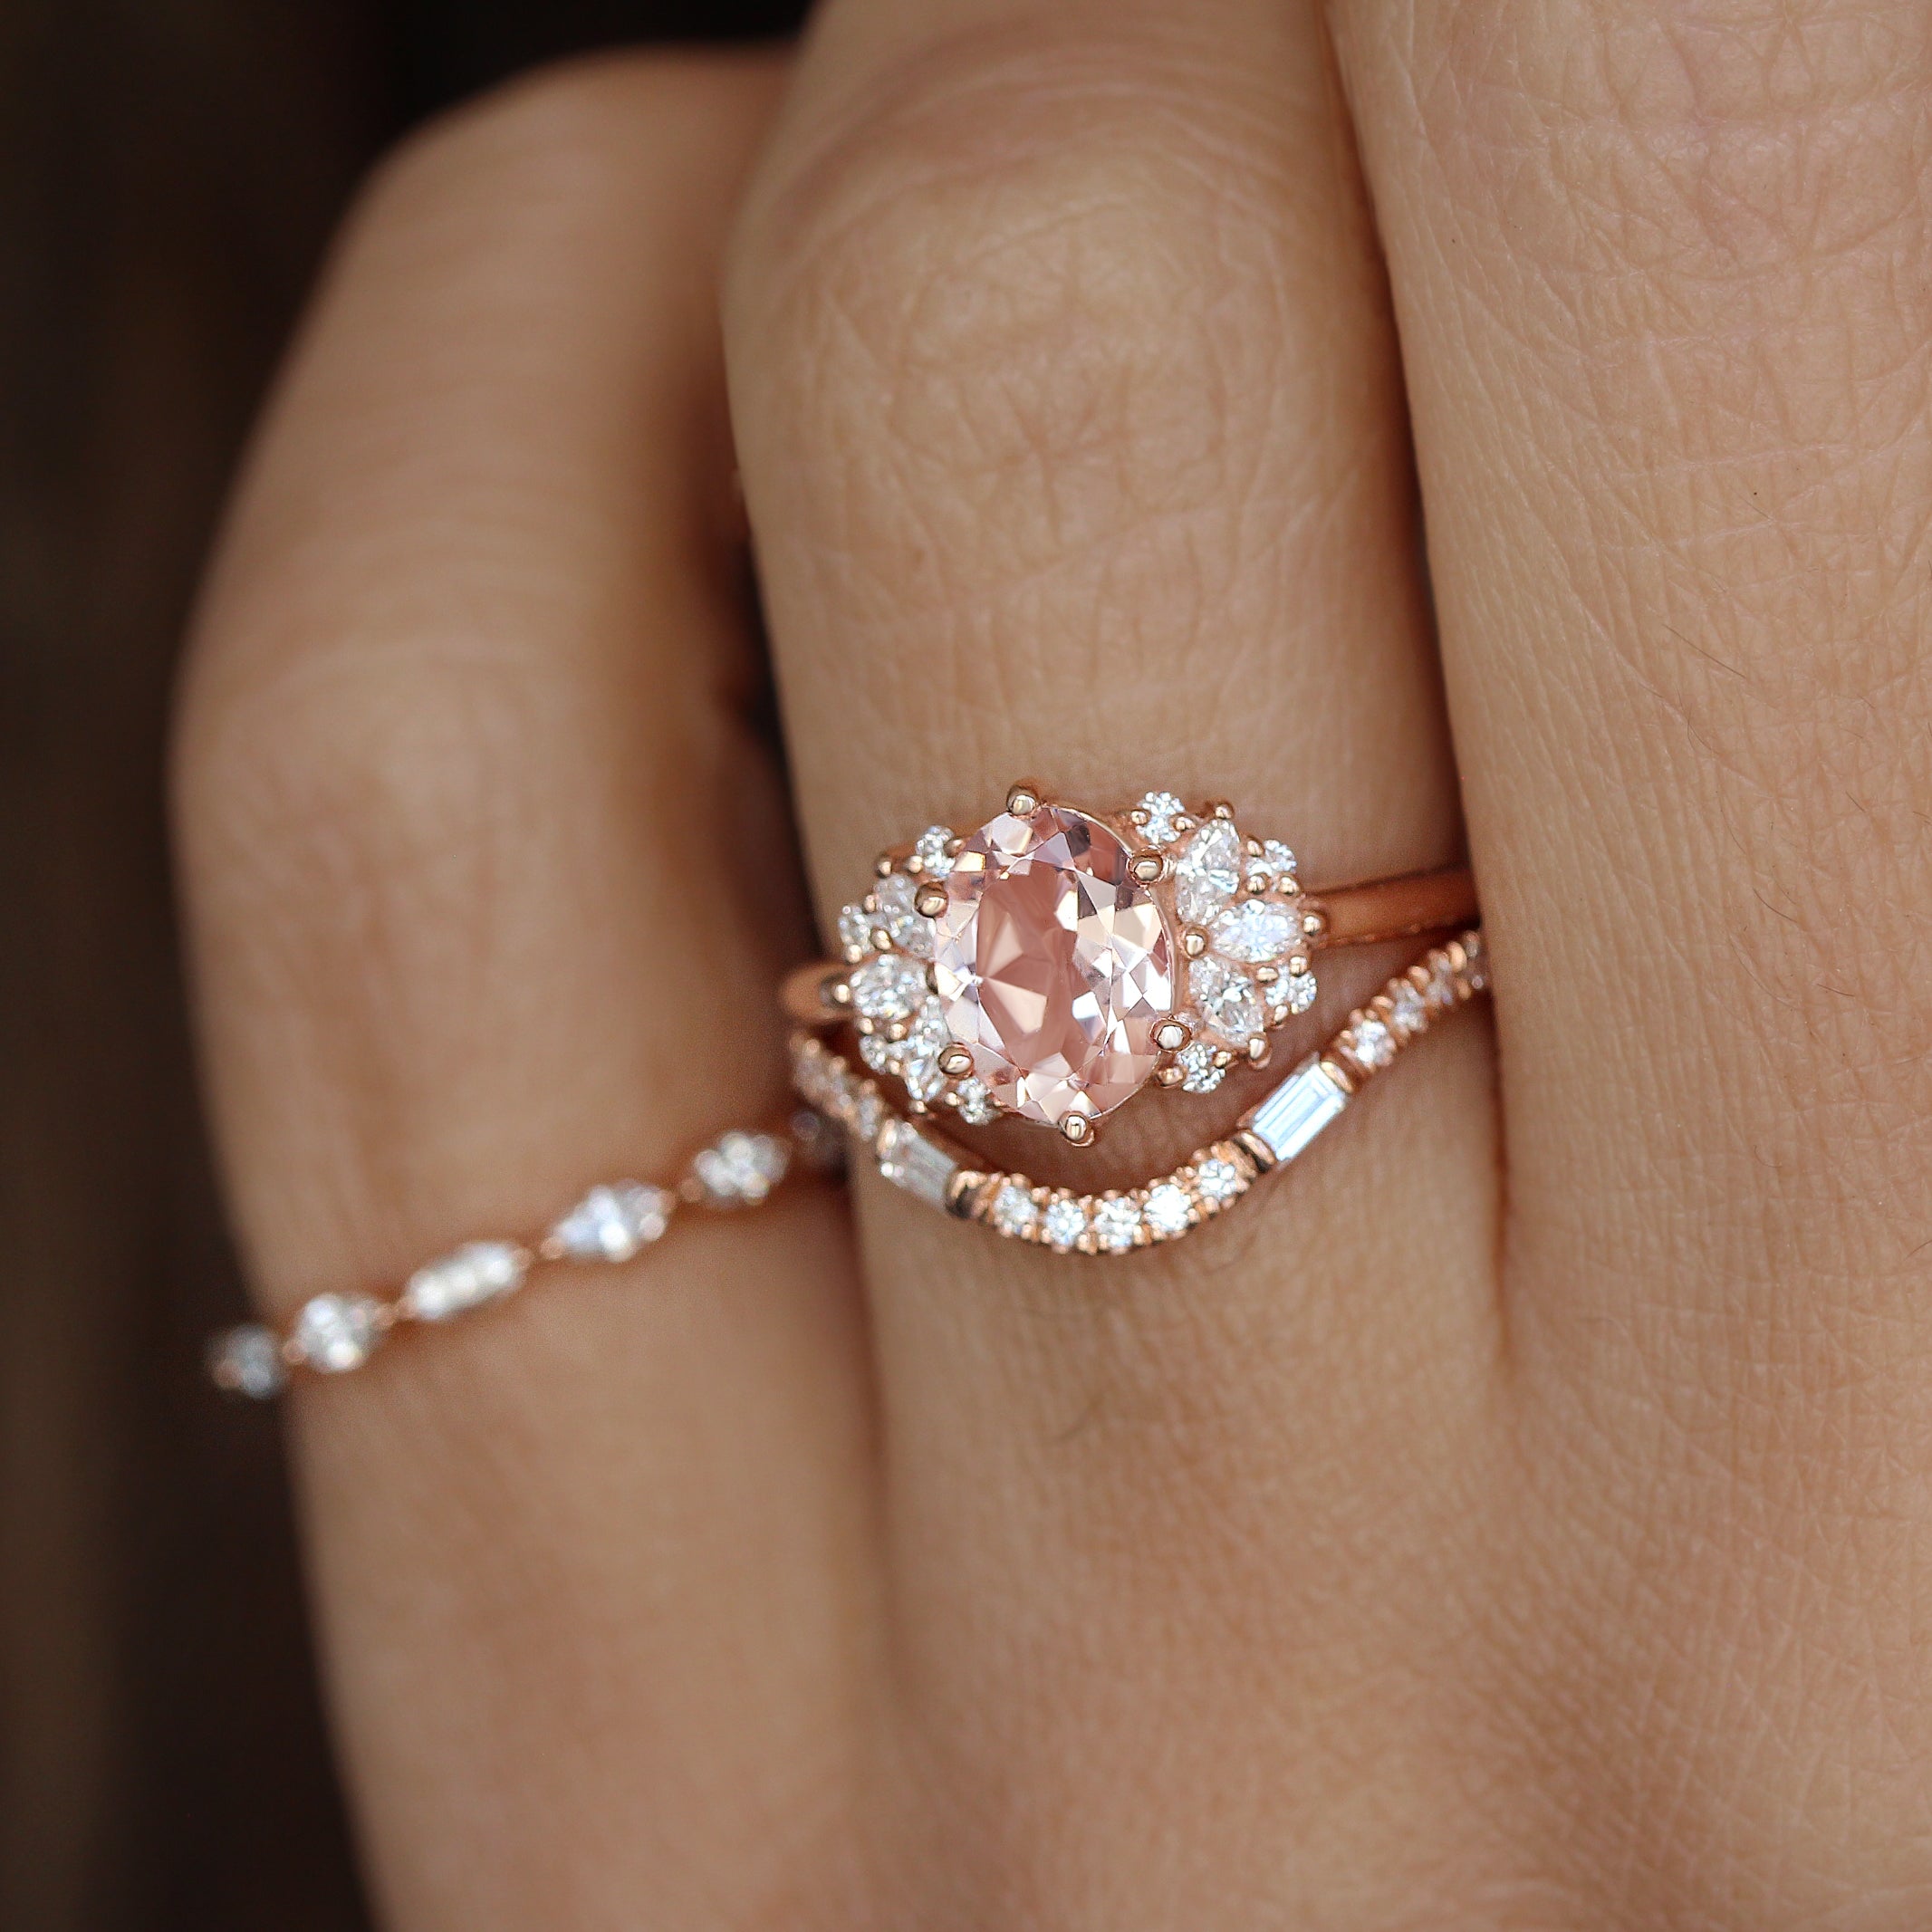 Oval Morganite and Marquise Diamonds Engagement Ring - Rosalia ♥